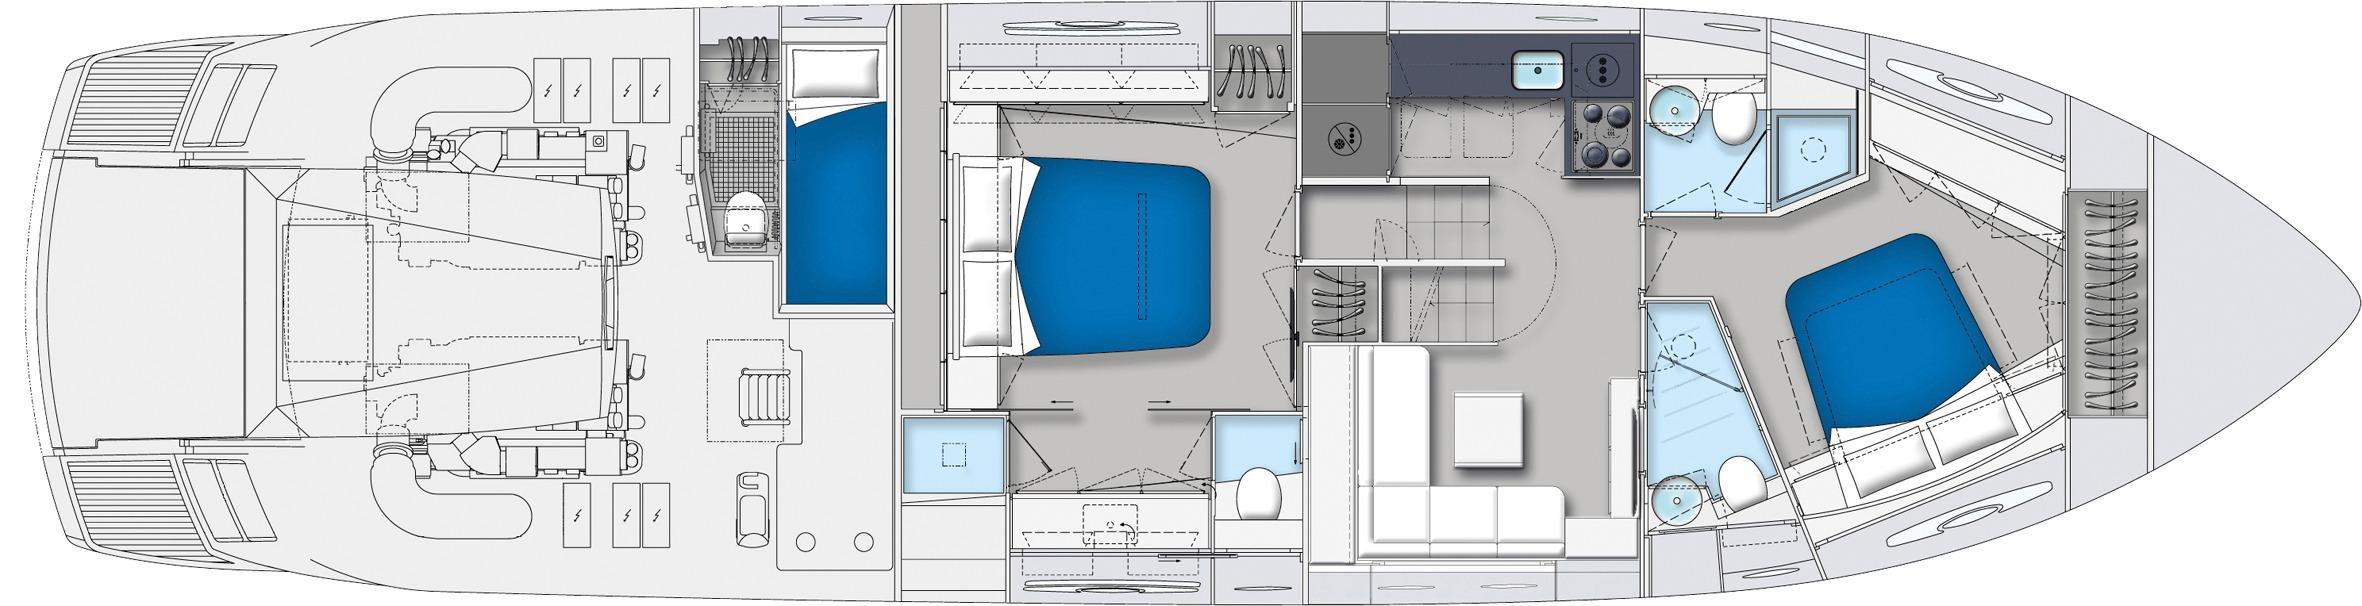 Manufacturer Provided Image: Manufacturer Provided Image: Pershing 62 3 Cabin Layout Plan